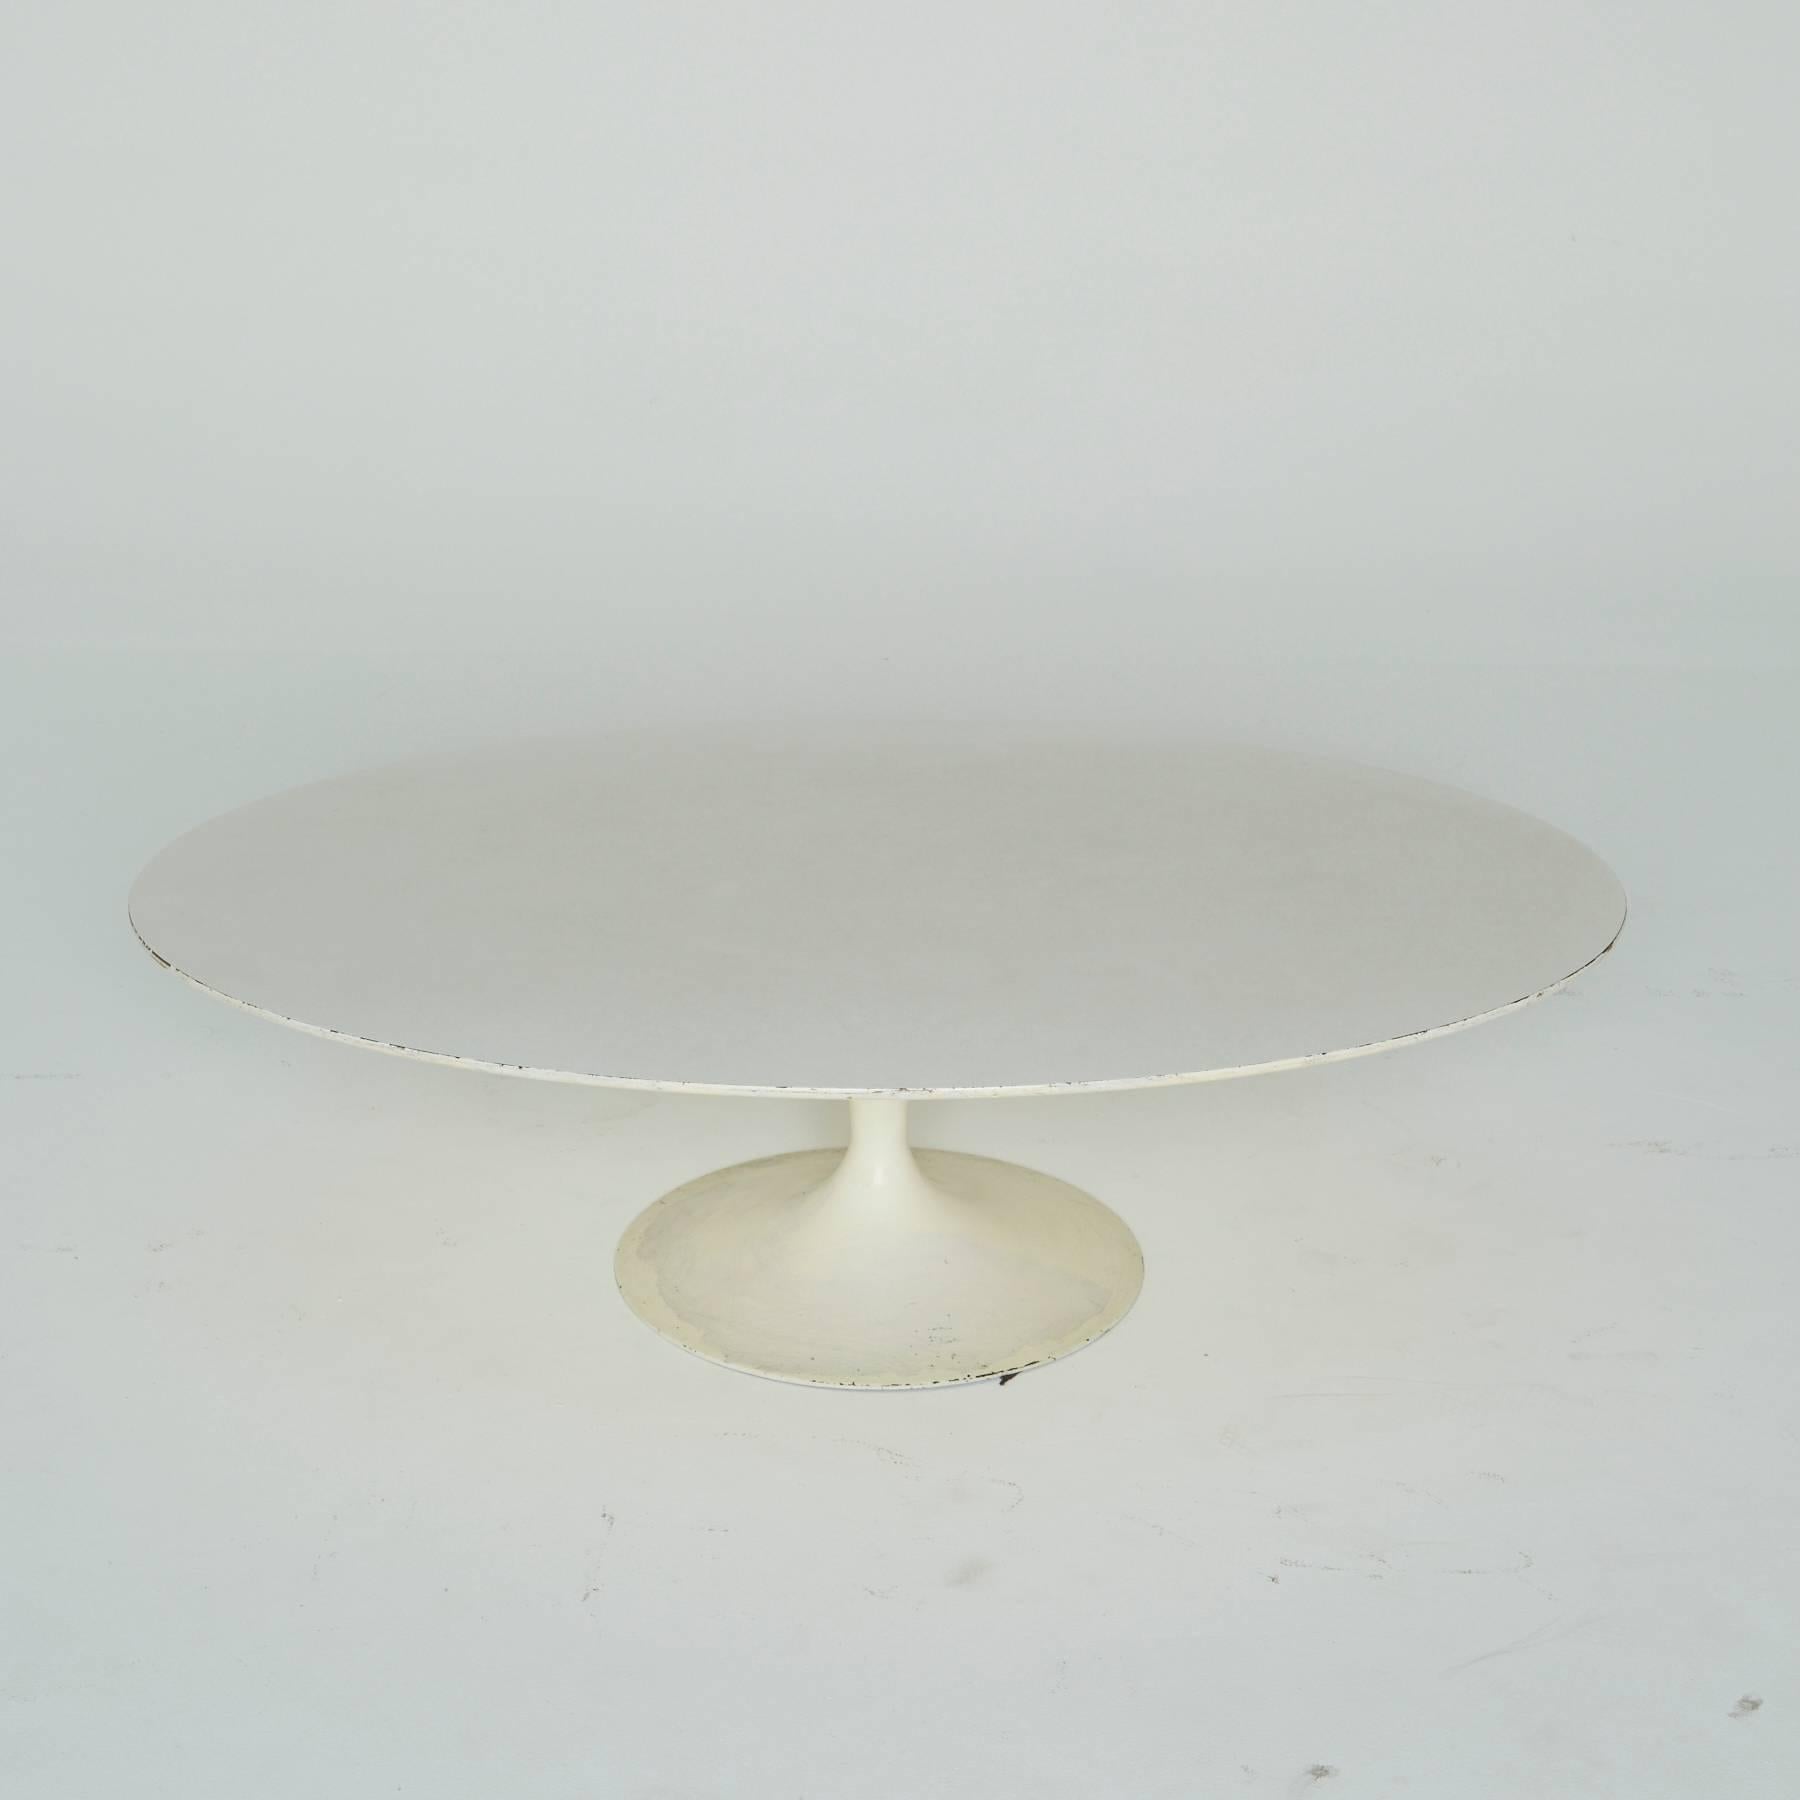 The white laminate oval tabletop is mounted on the famously curved cast iron pedestal base, creating the low, coffee table rendition of the widely recognized and adored tulip / pedestal table. Created by Eero Saarinen in 1957 for Knoll, the sinuous